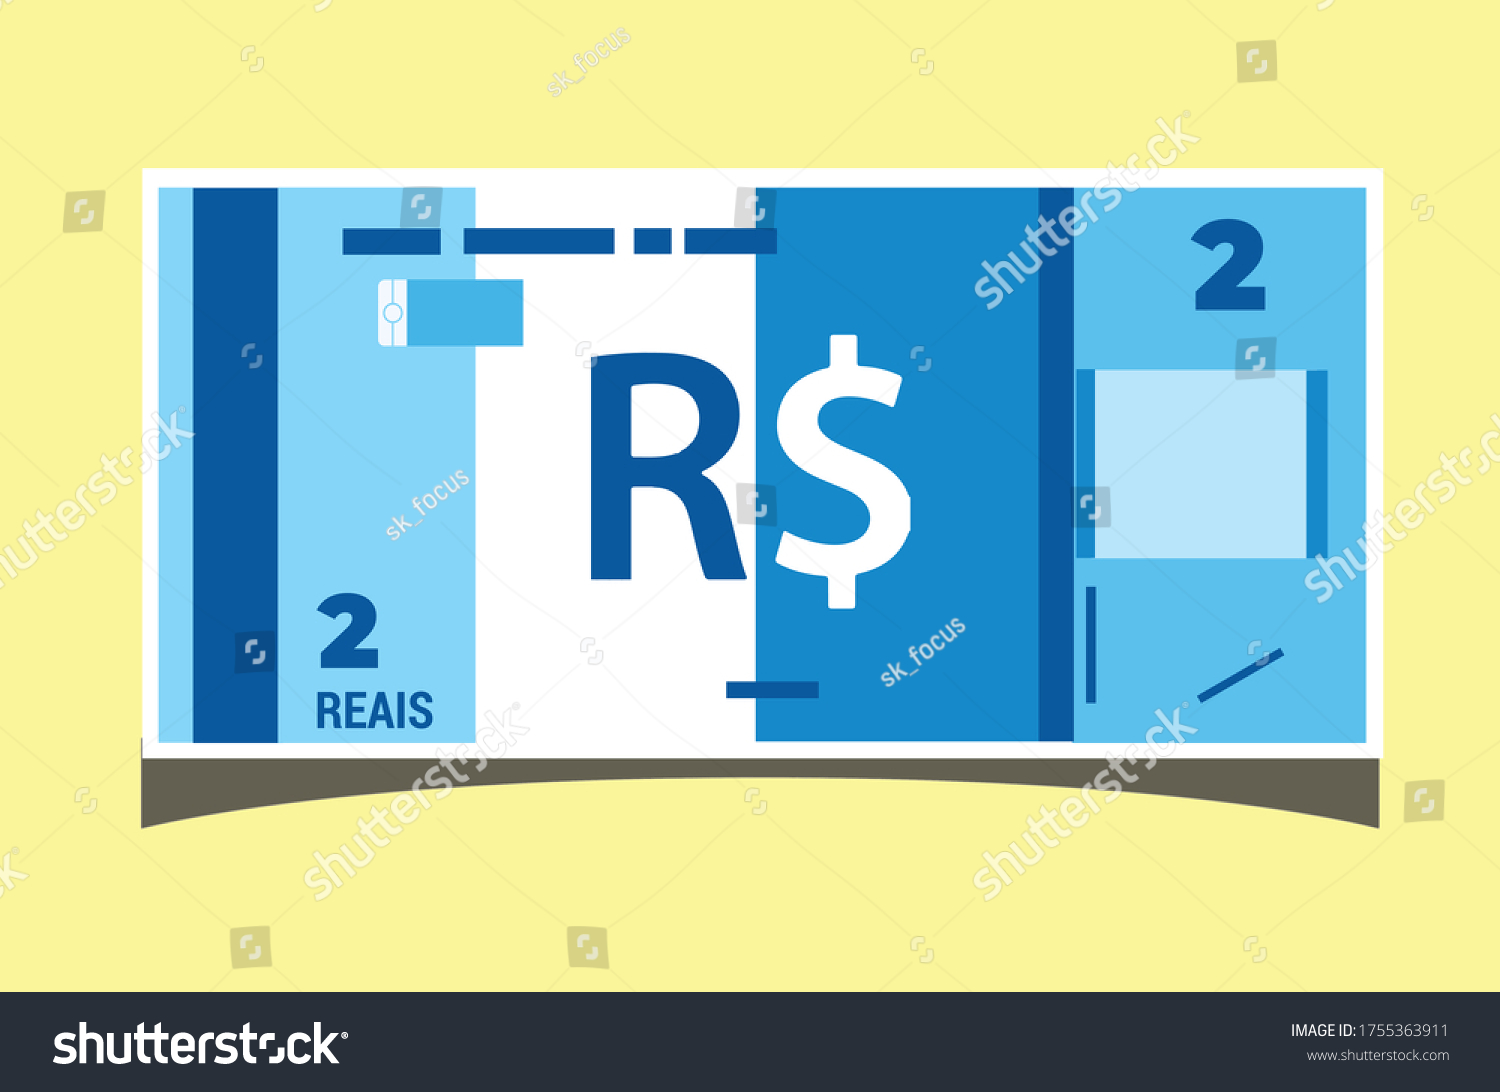 SVG of 2 Brazilian Real Banknotes money vector icon logo illustration and design. Brazil currency, business, payment and finance element. Can be used for web, mobile, infographic, and print. EPS 10 Vector. svg